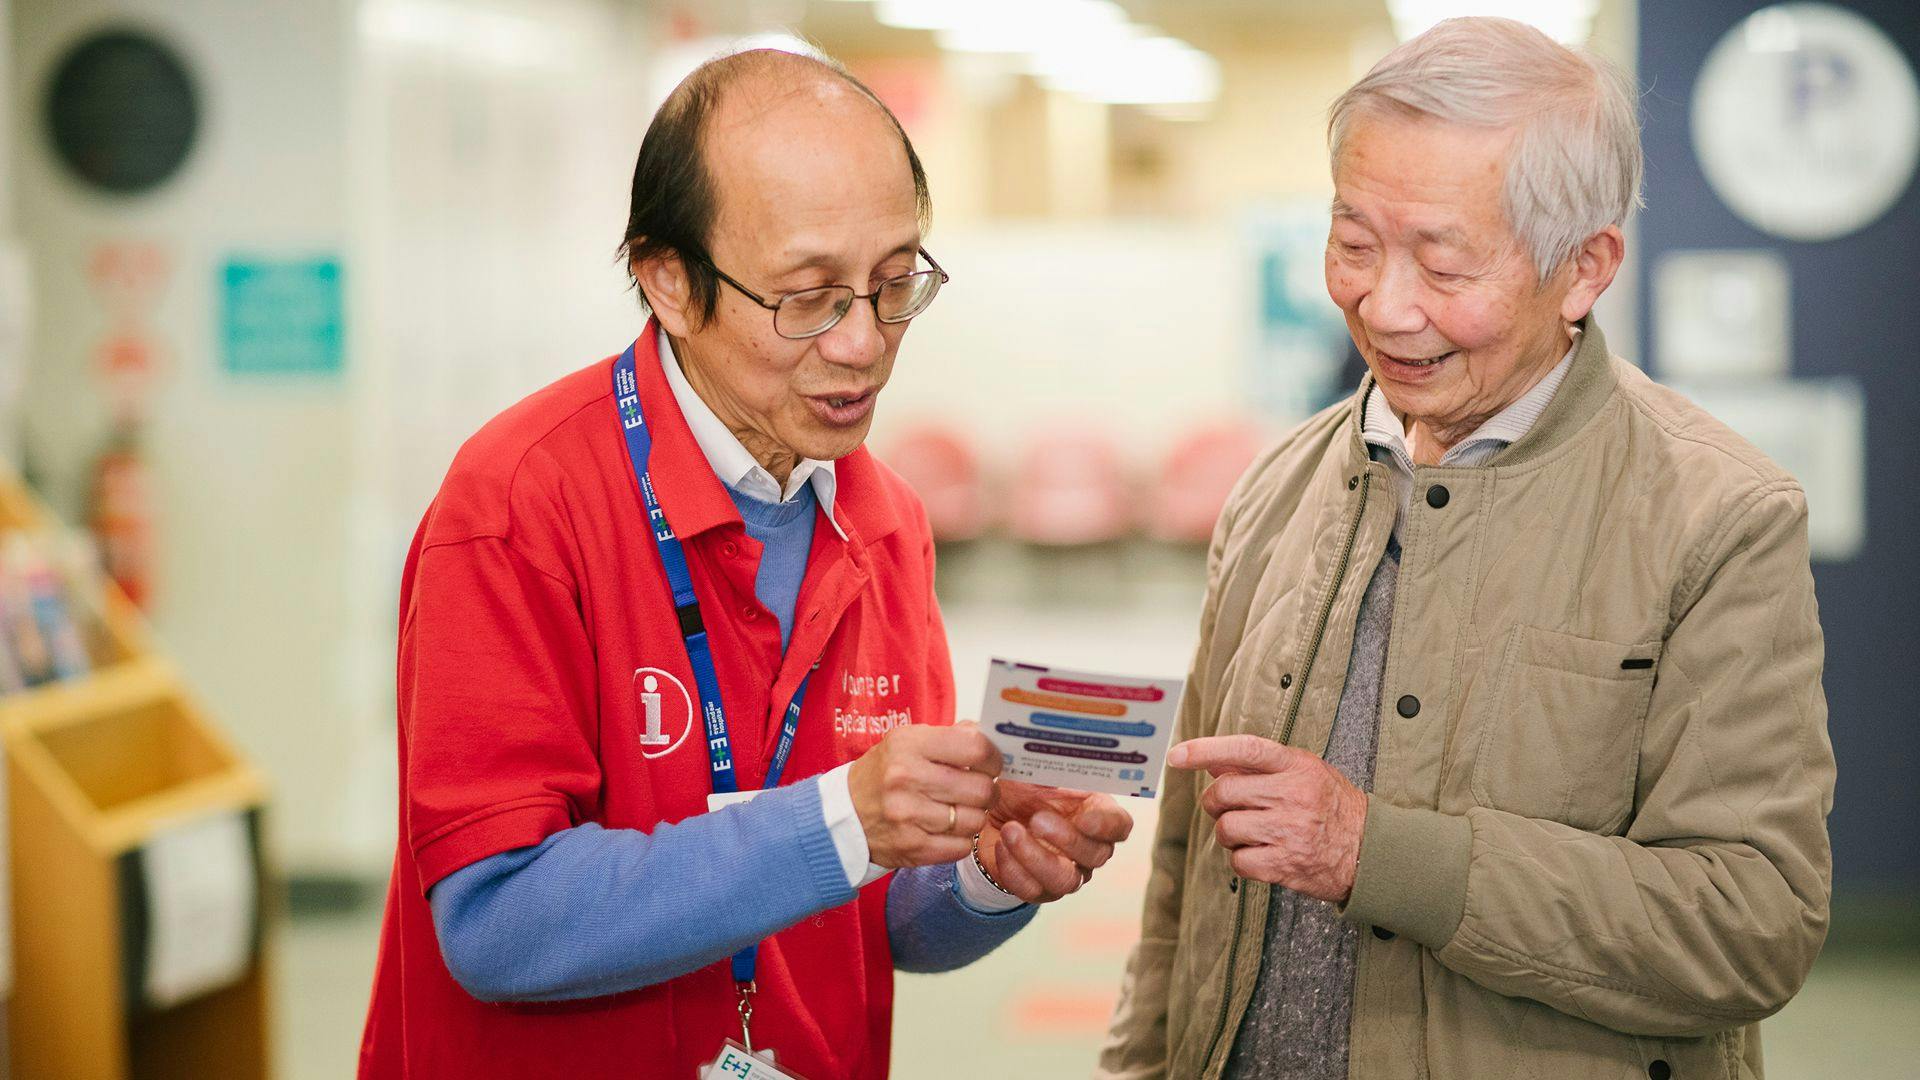 A volunteer at the hospital giving information to a visitor